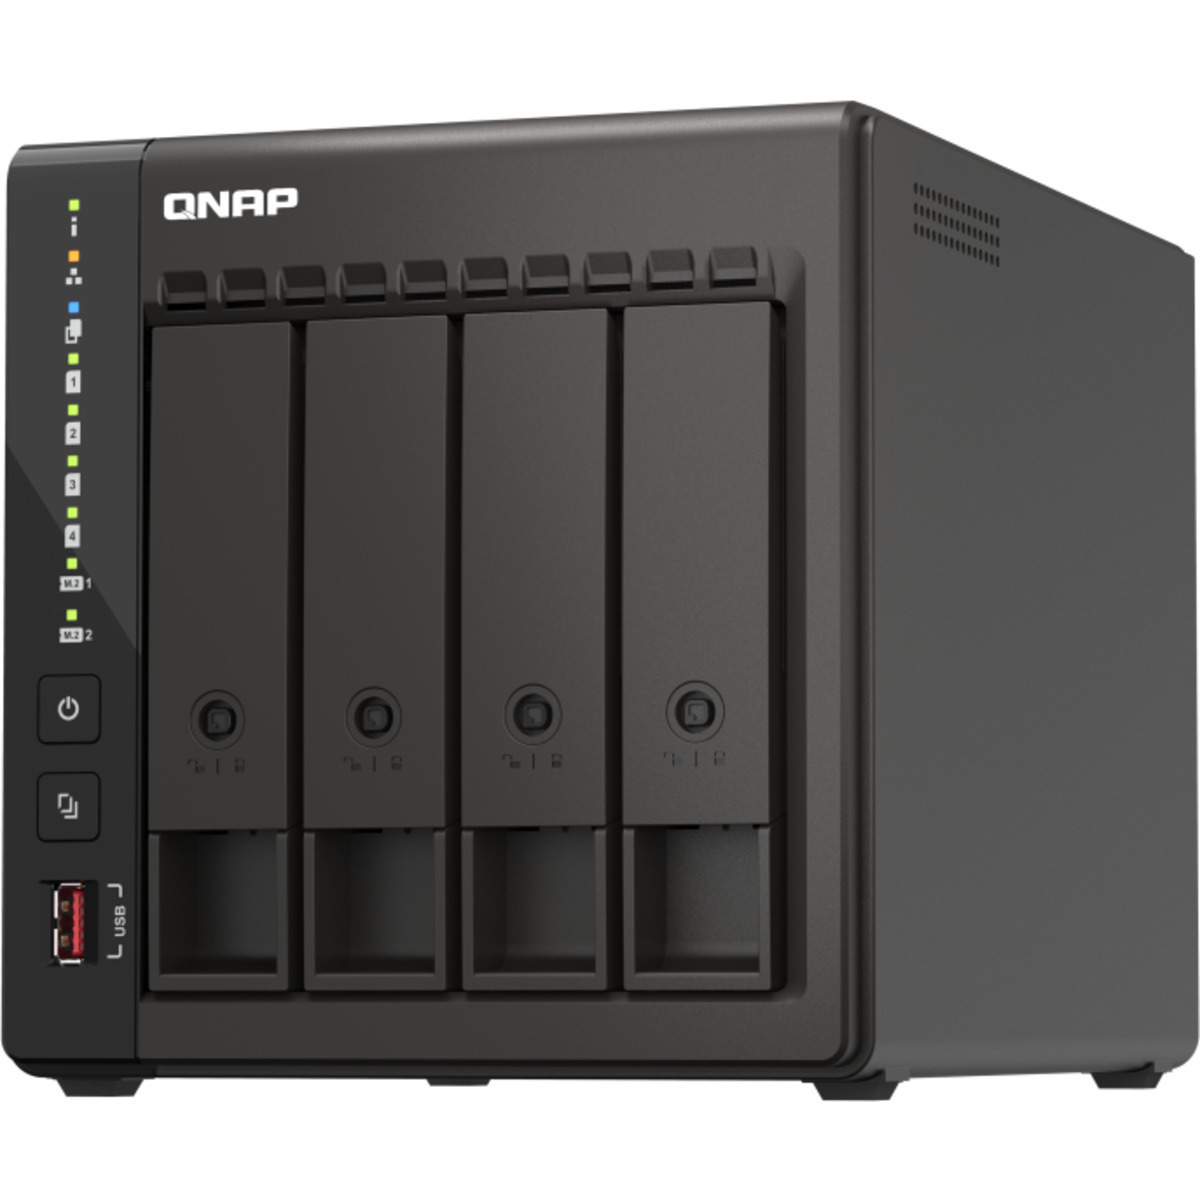 QNAP TS-453E 30tb 4-Bay Desktop Multimedia / Power User / Business NAS - Network Attached Storage Device 3x10tb Western Digital Red Pro WD102KFBX 3.5 7200rpm SATA 6Gb/s HDD NAS Class Drives Installed - Burn-In Tested TS-453E